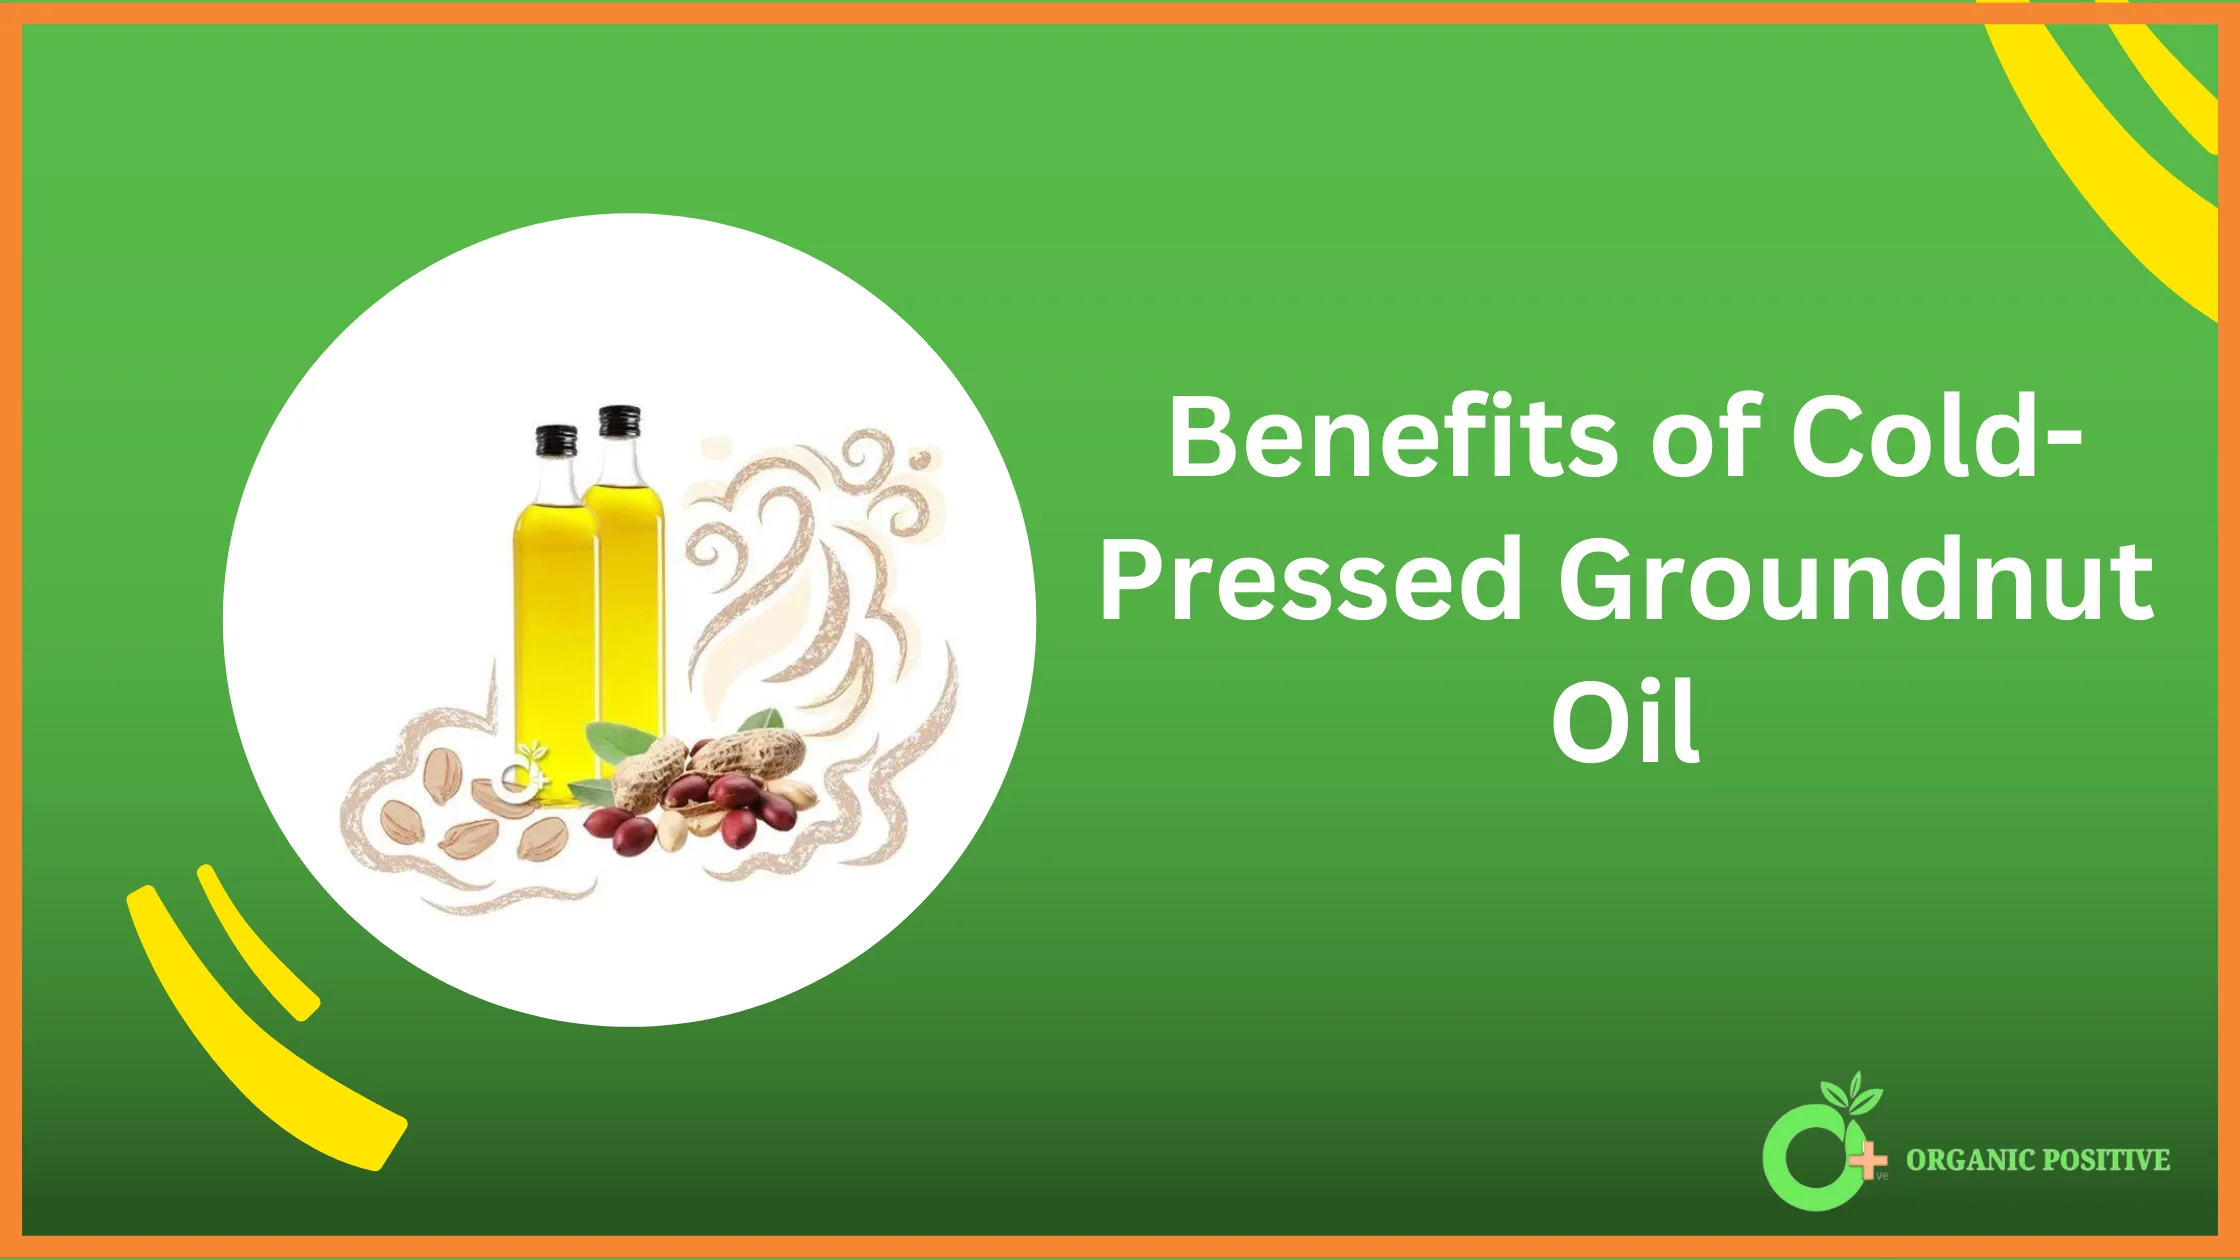 Benefits of Cold-Pressed Groundnut Oil